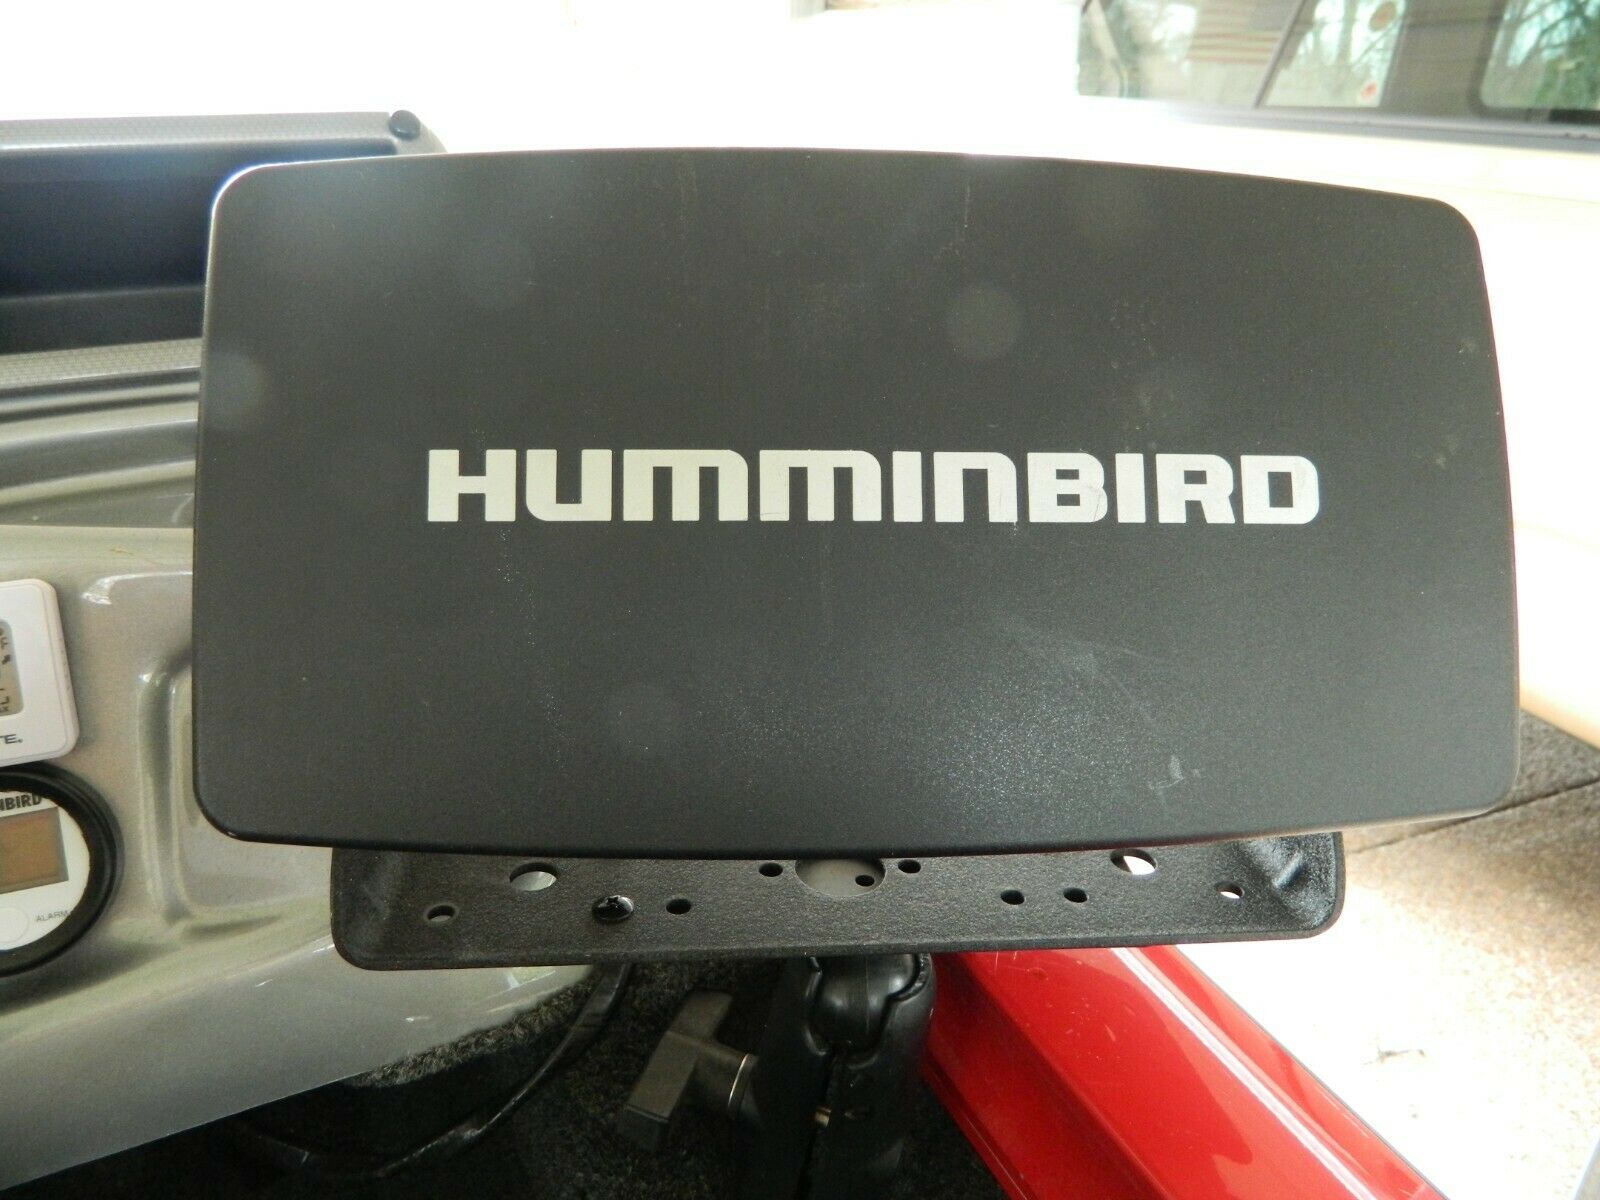 Hummingbird 859 Ci Hd Transducer And New Power Cable